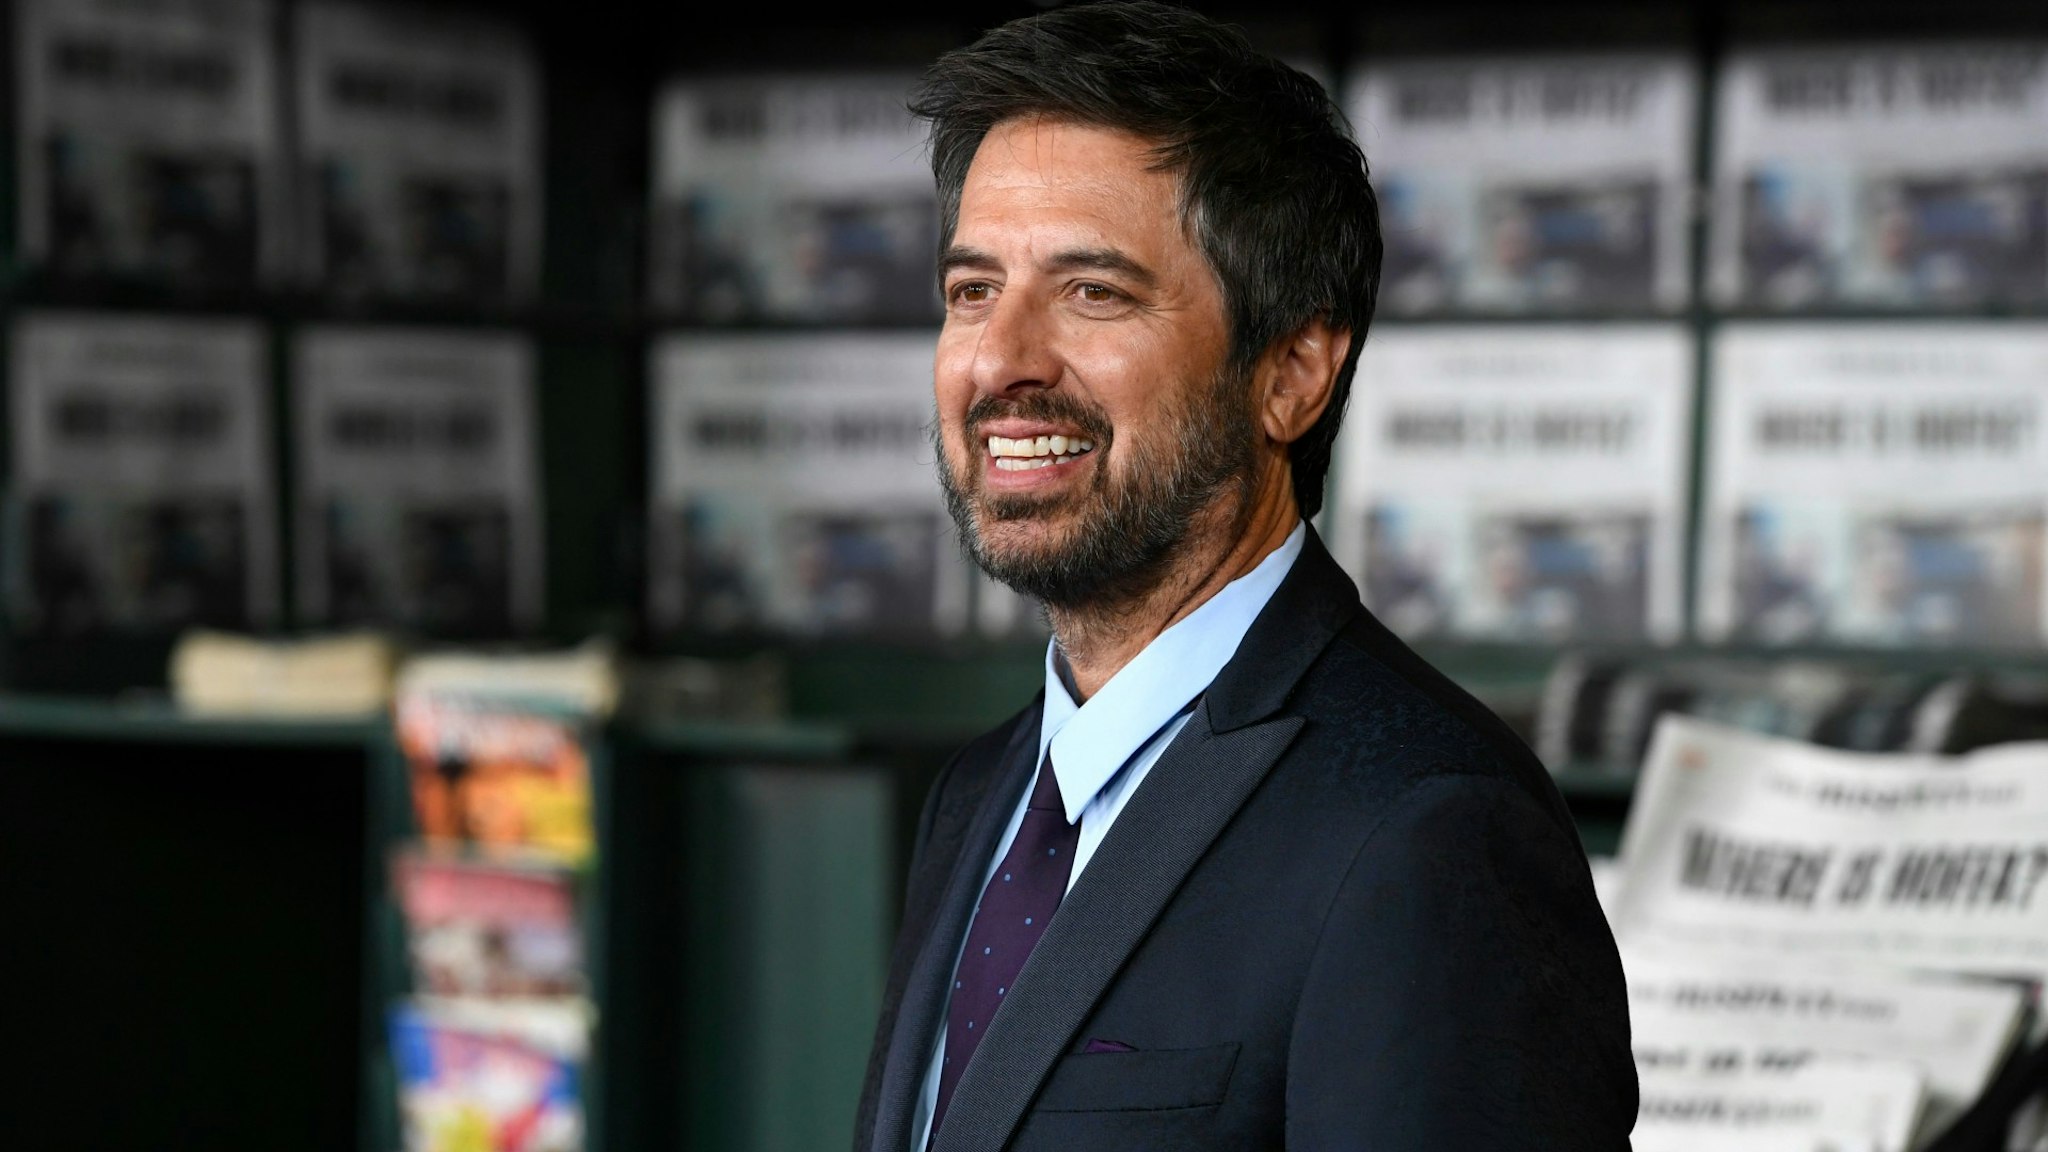 Ray Romano attends the Premiere Of Netflix's "The Irishman" at TCL Chinese Theatre on October 24, 2019 in Hollywood, California.